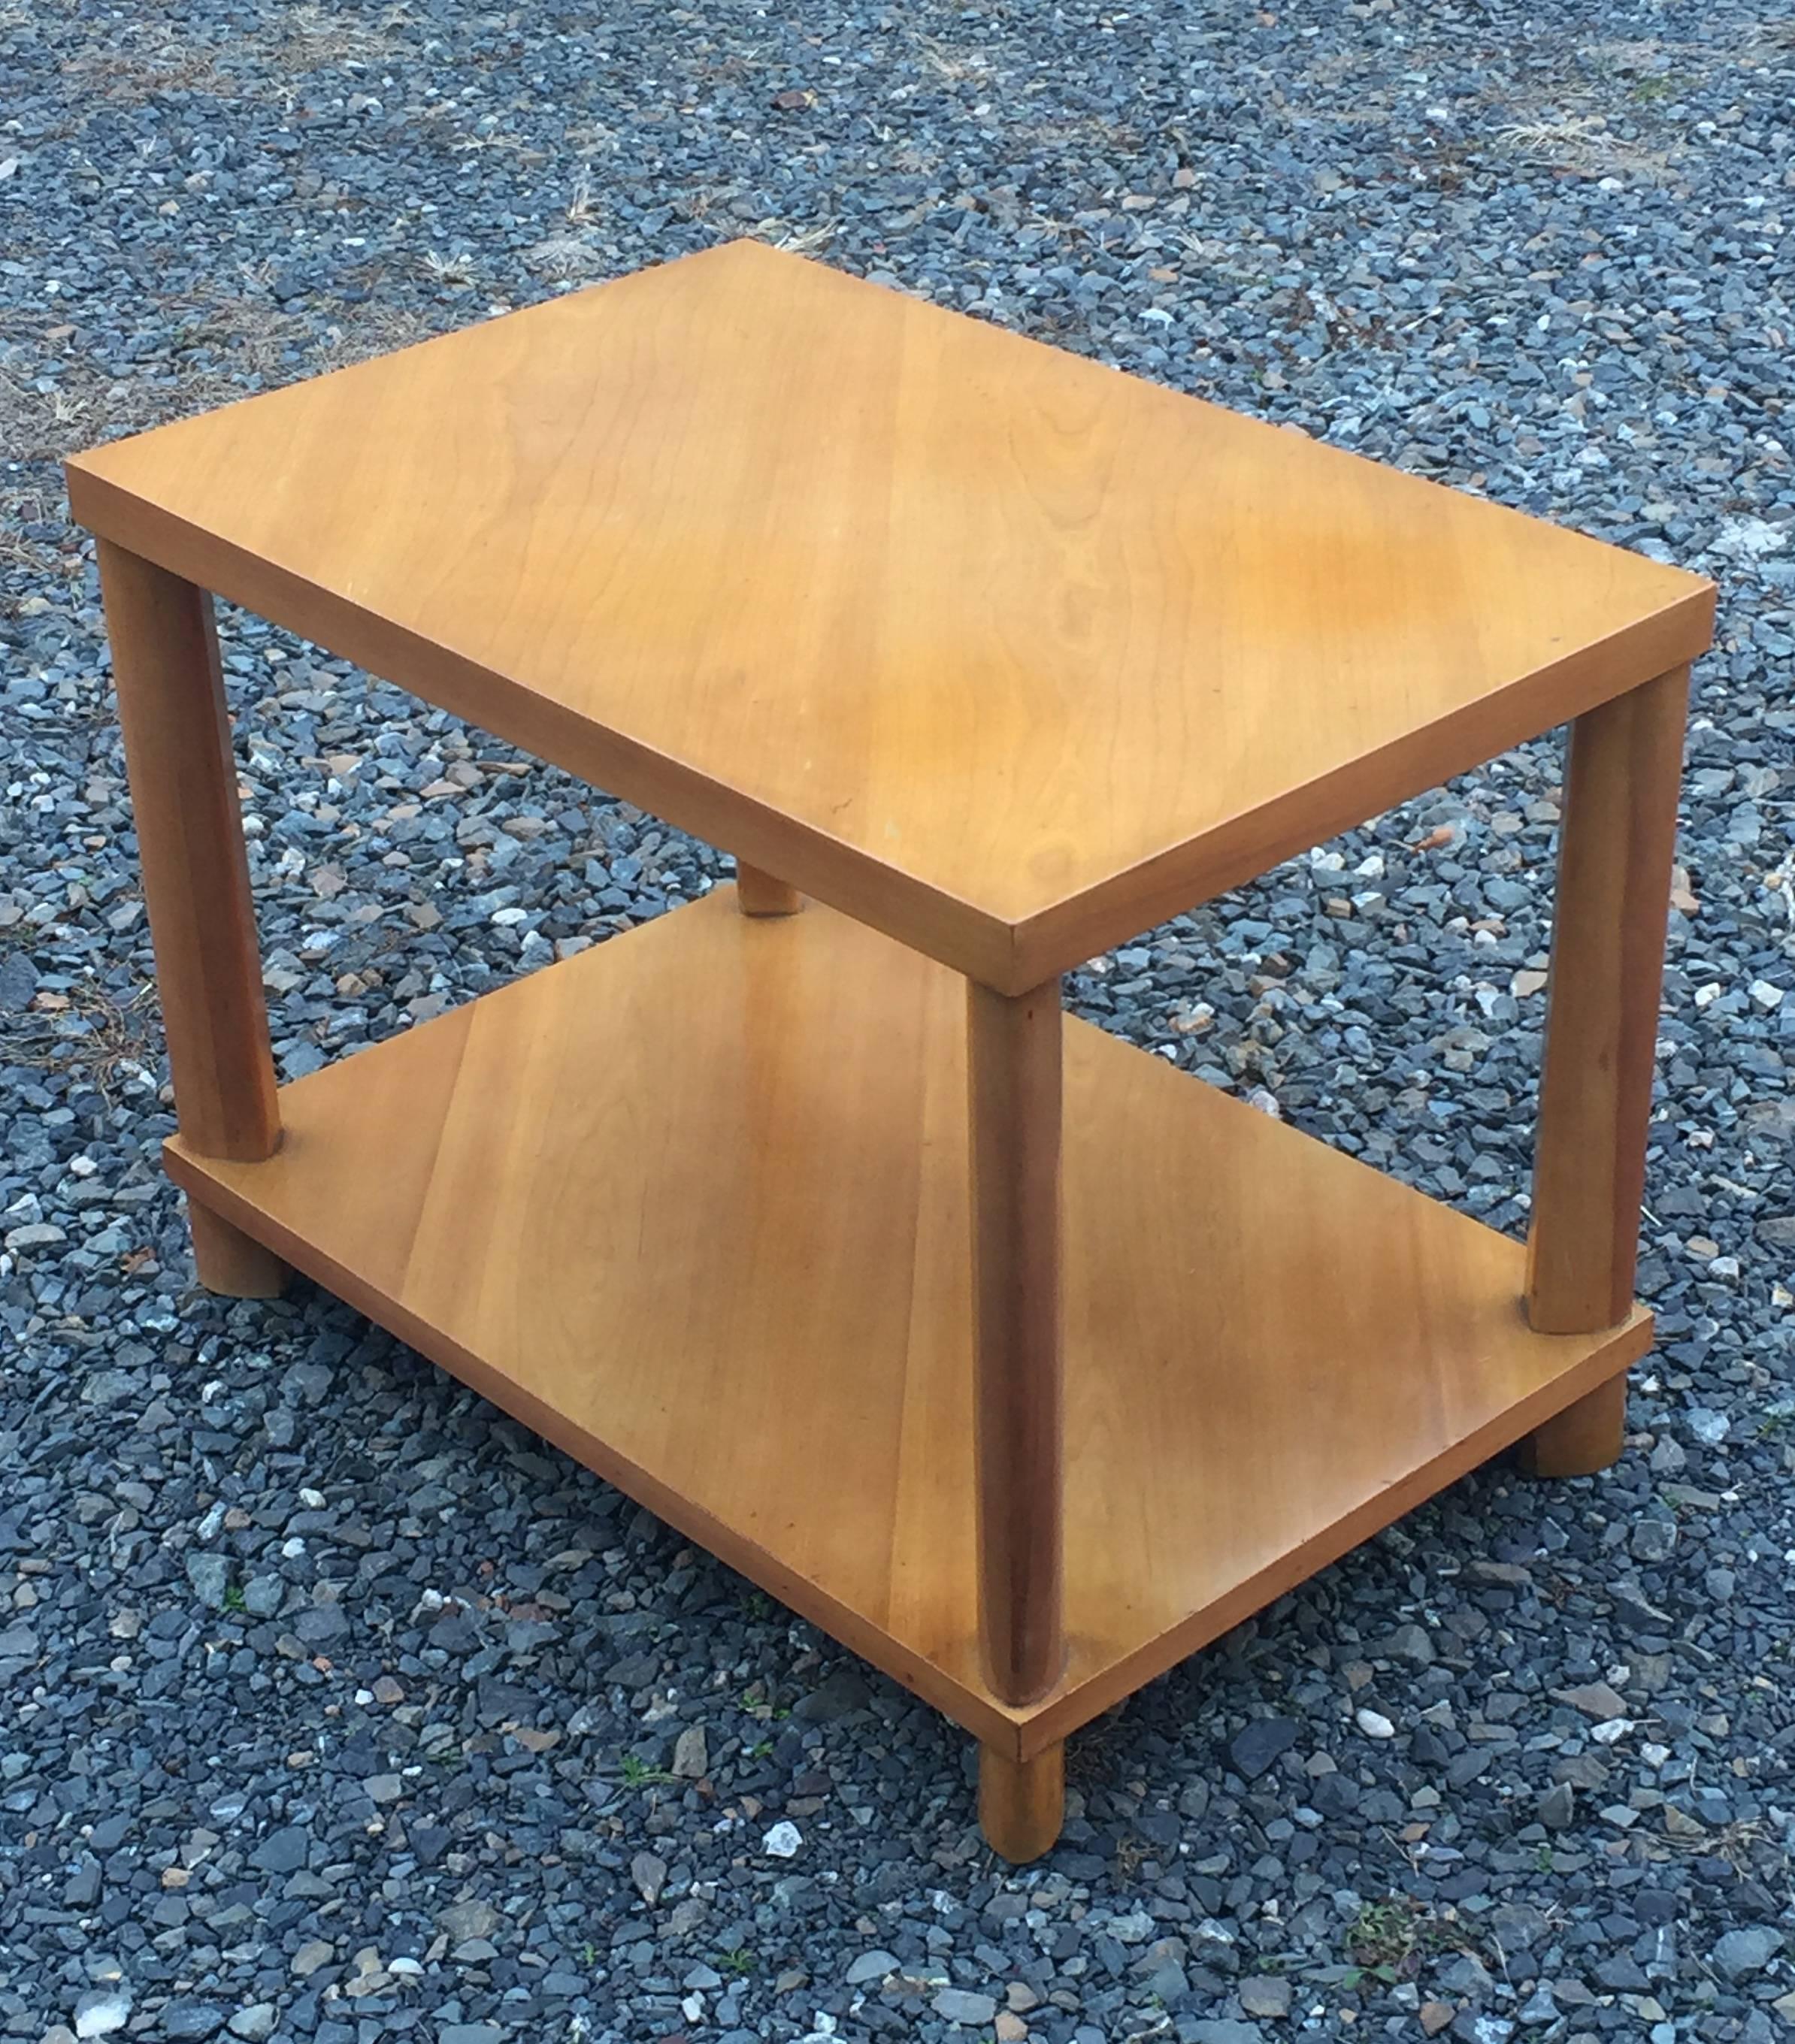 Classic Gibbings two-tier side table with oval dowel legs. Perfect proportions with bias cut top and lower shelf, simplified elegance. Honey colored walnut.